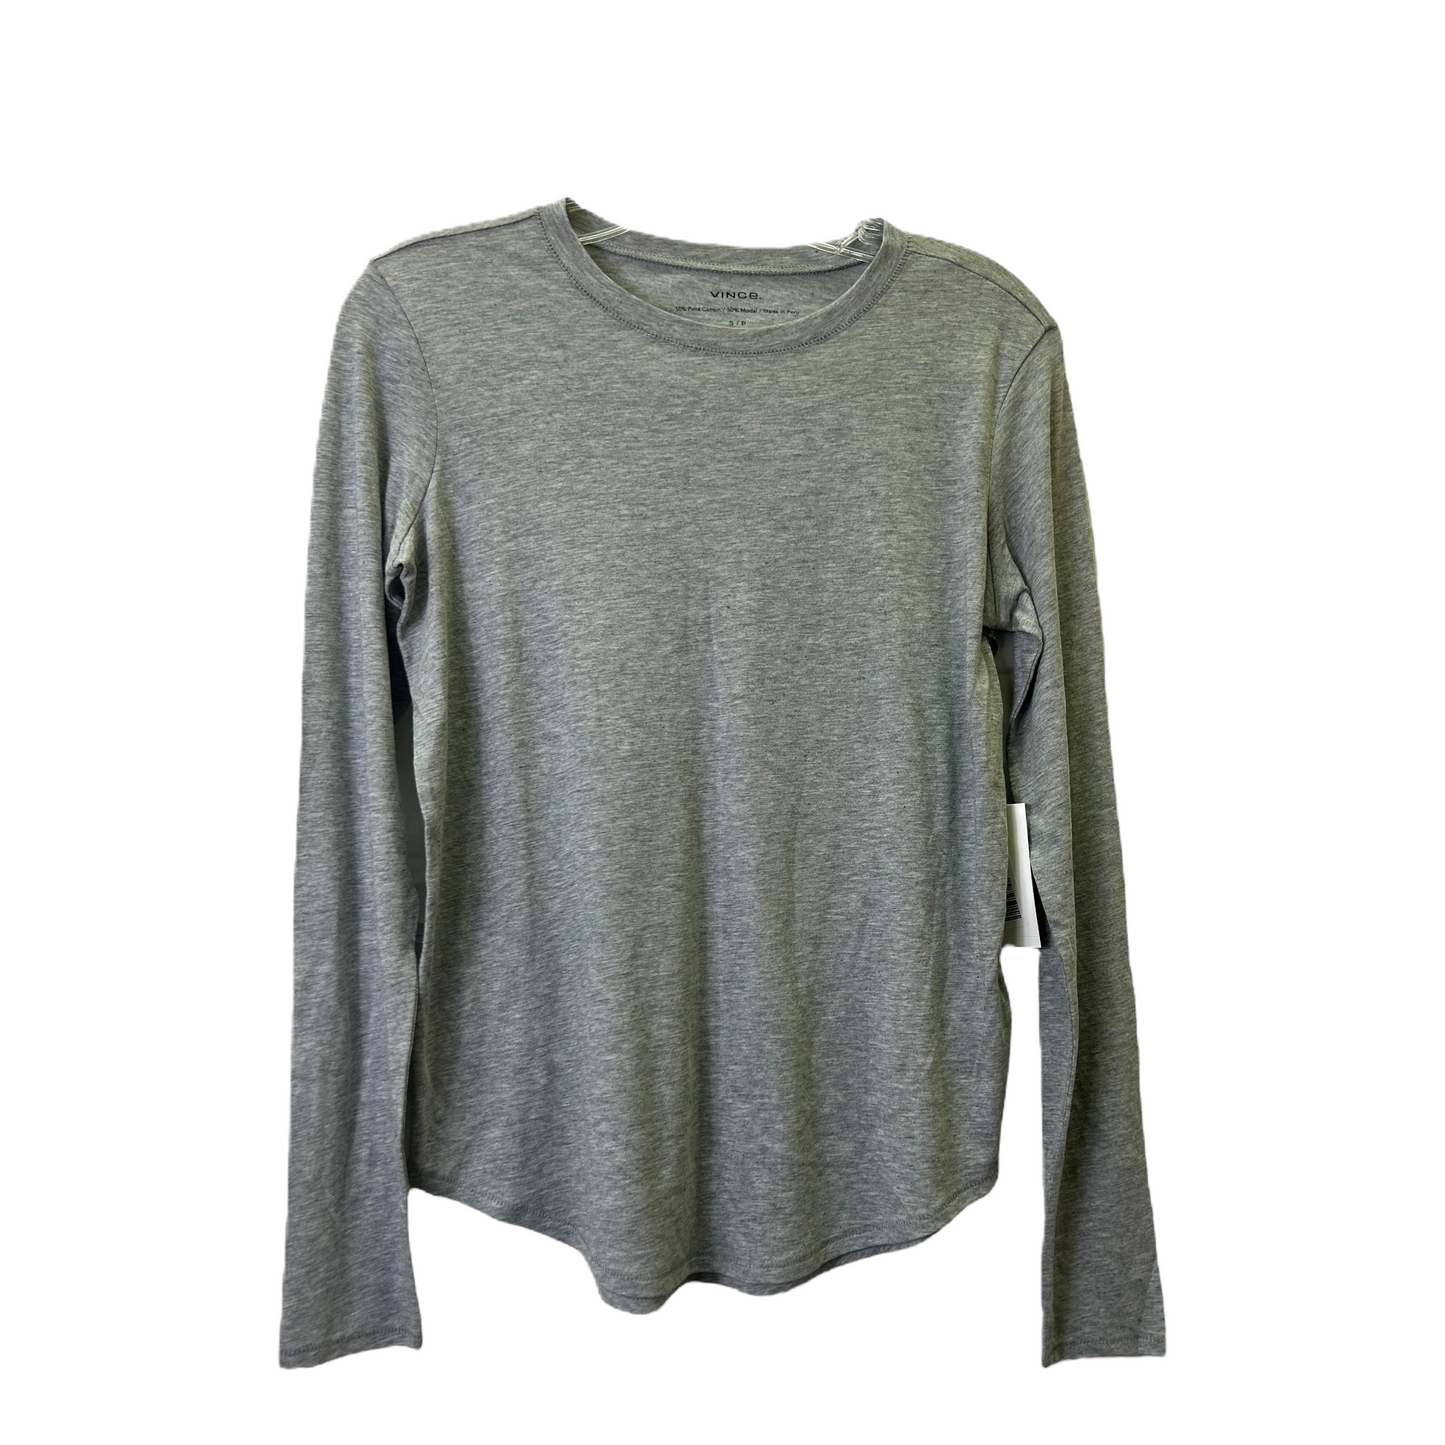 Grey Top Long Sleeve Basic By Vince, Size: S